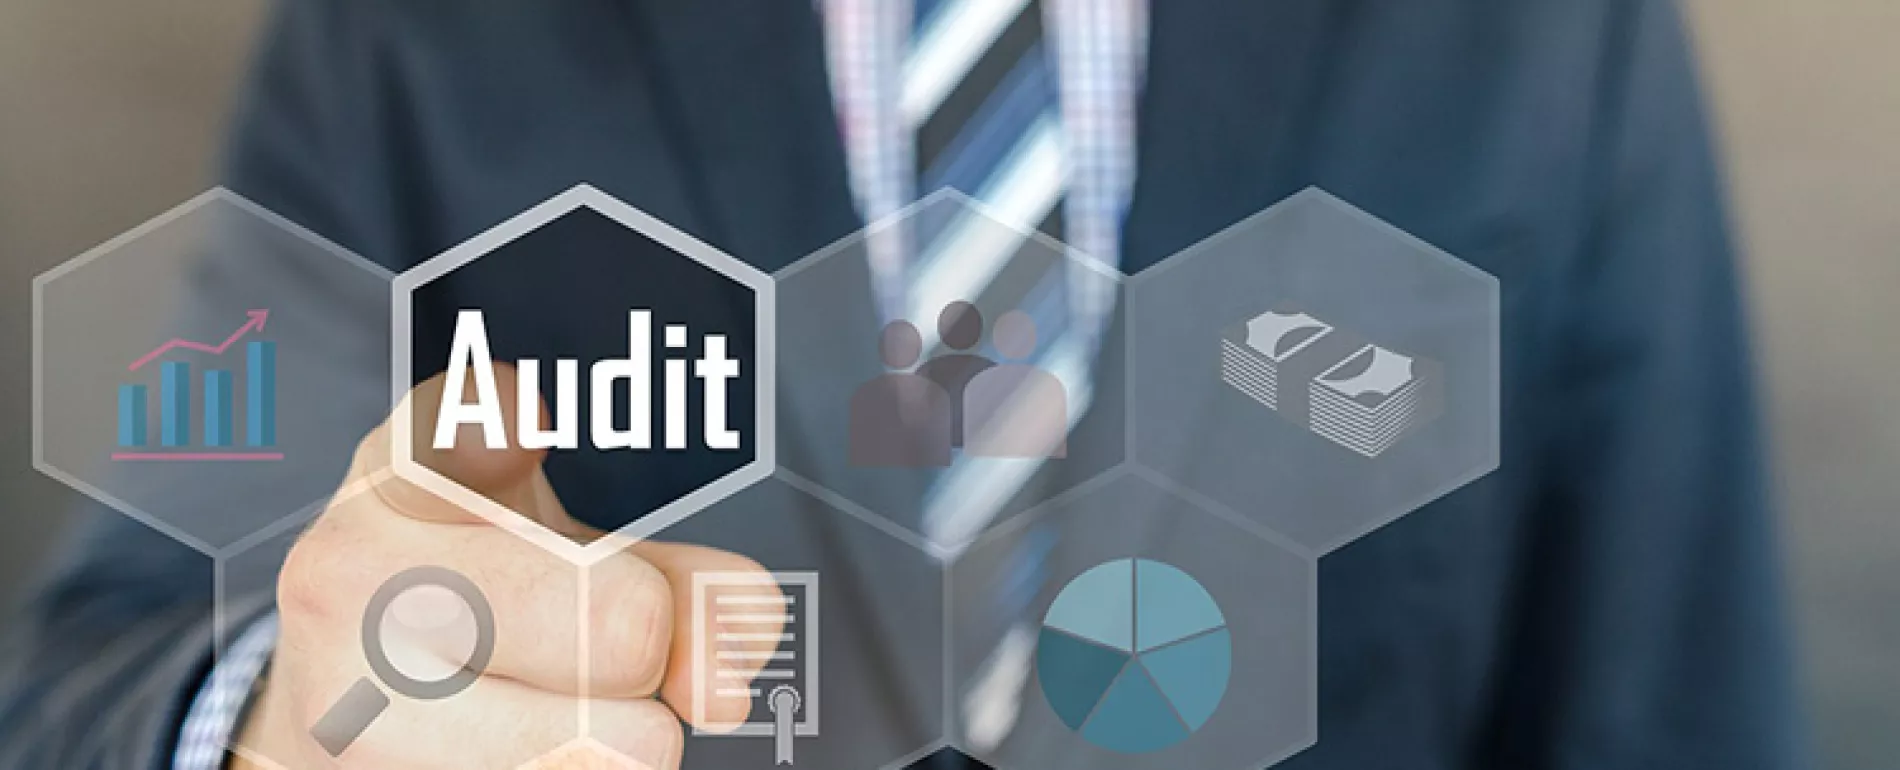 Acing an Audit: What to Do Before, During, and after an Inspection